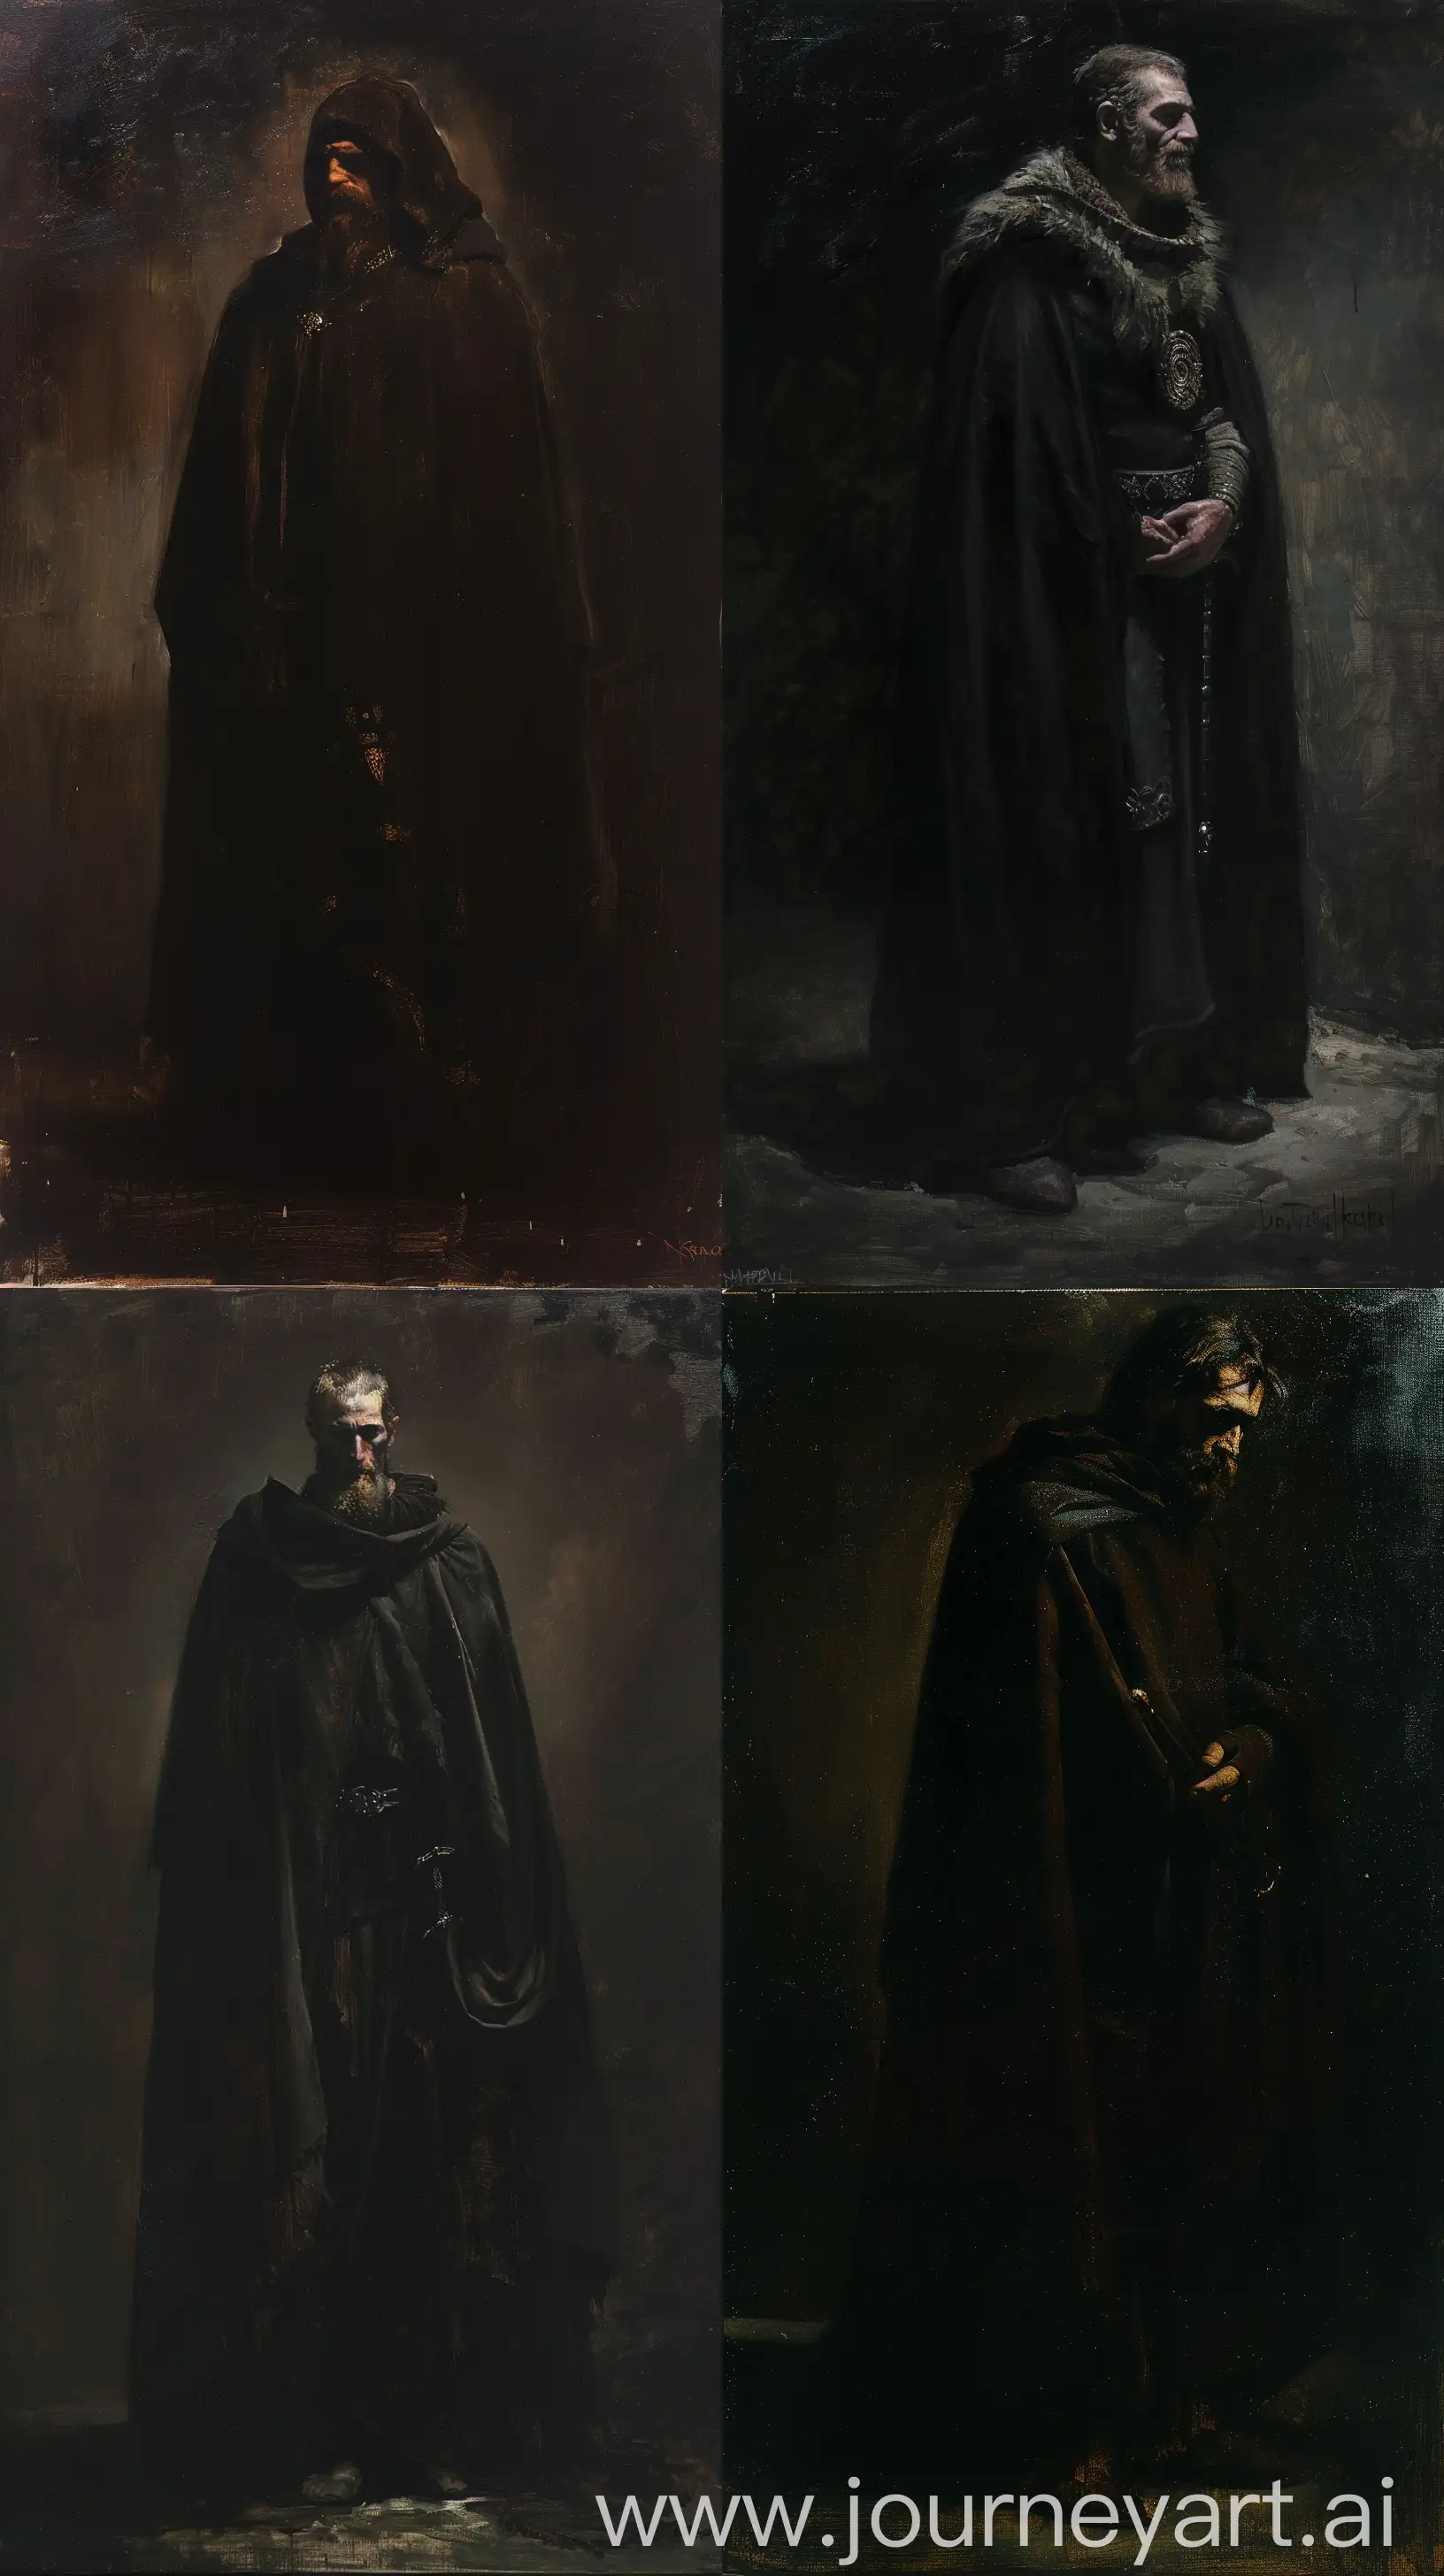 Alfred the Great, cloaked in shadows, stands resolute in an oil painting, his regal figure outlined by the darkness, hinting at the weight of his responsibilities and the challenges he faced during his reign. --ar 9:16